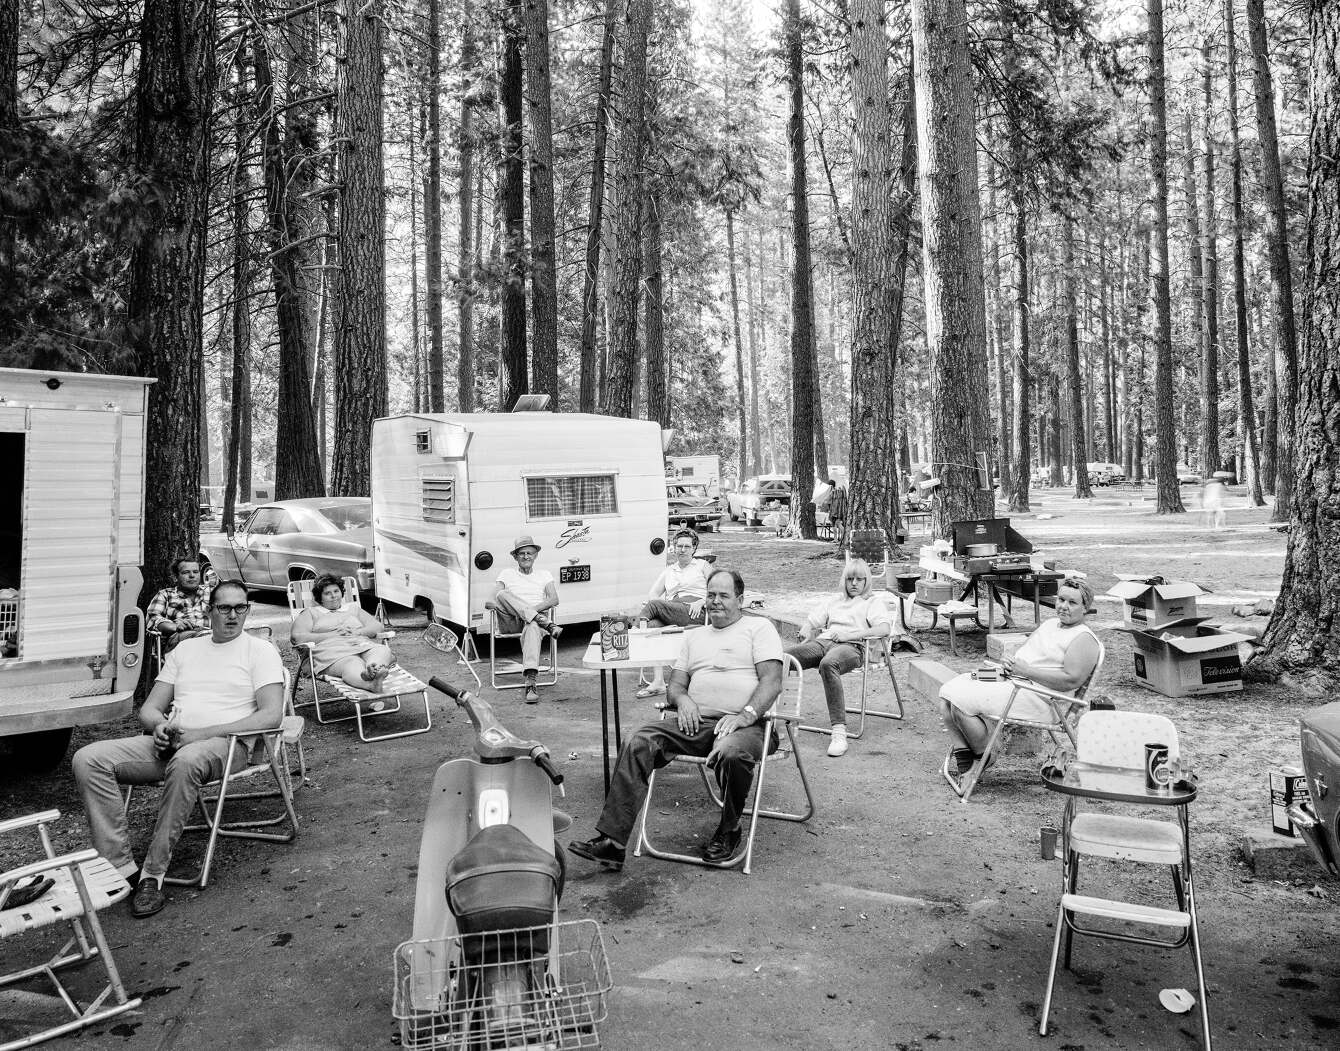 Making Camp: A Visual History of Camping's Most Essential Items & Activities